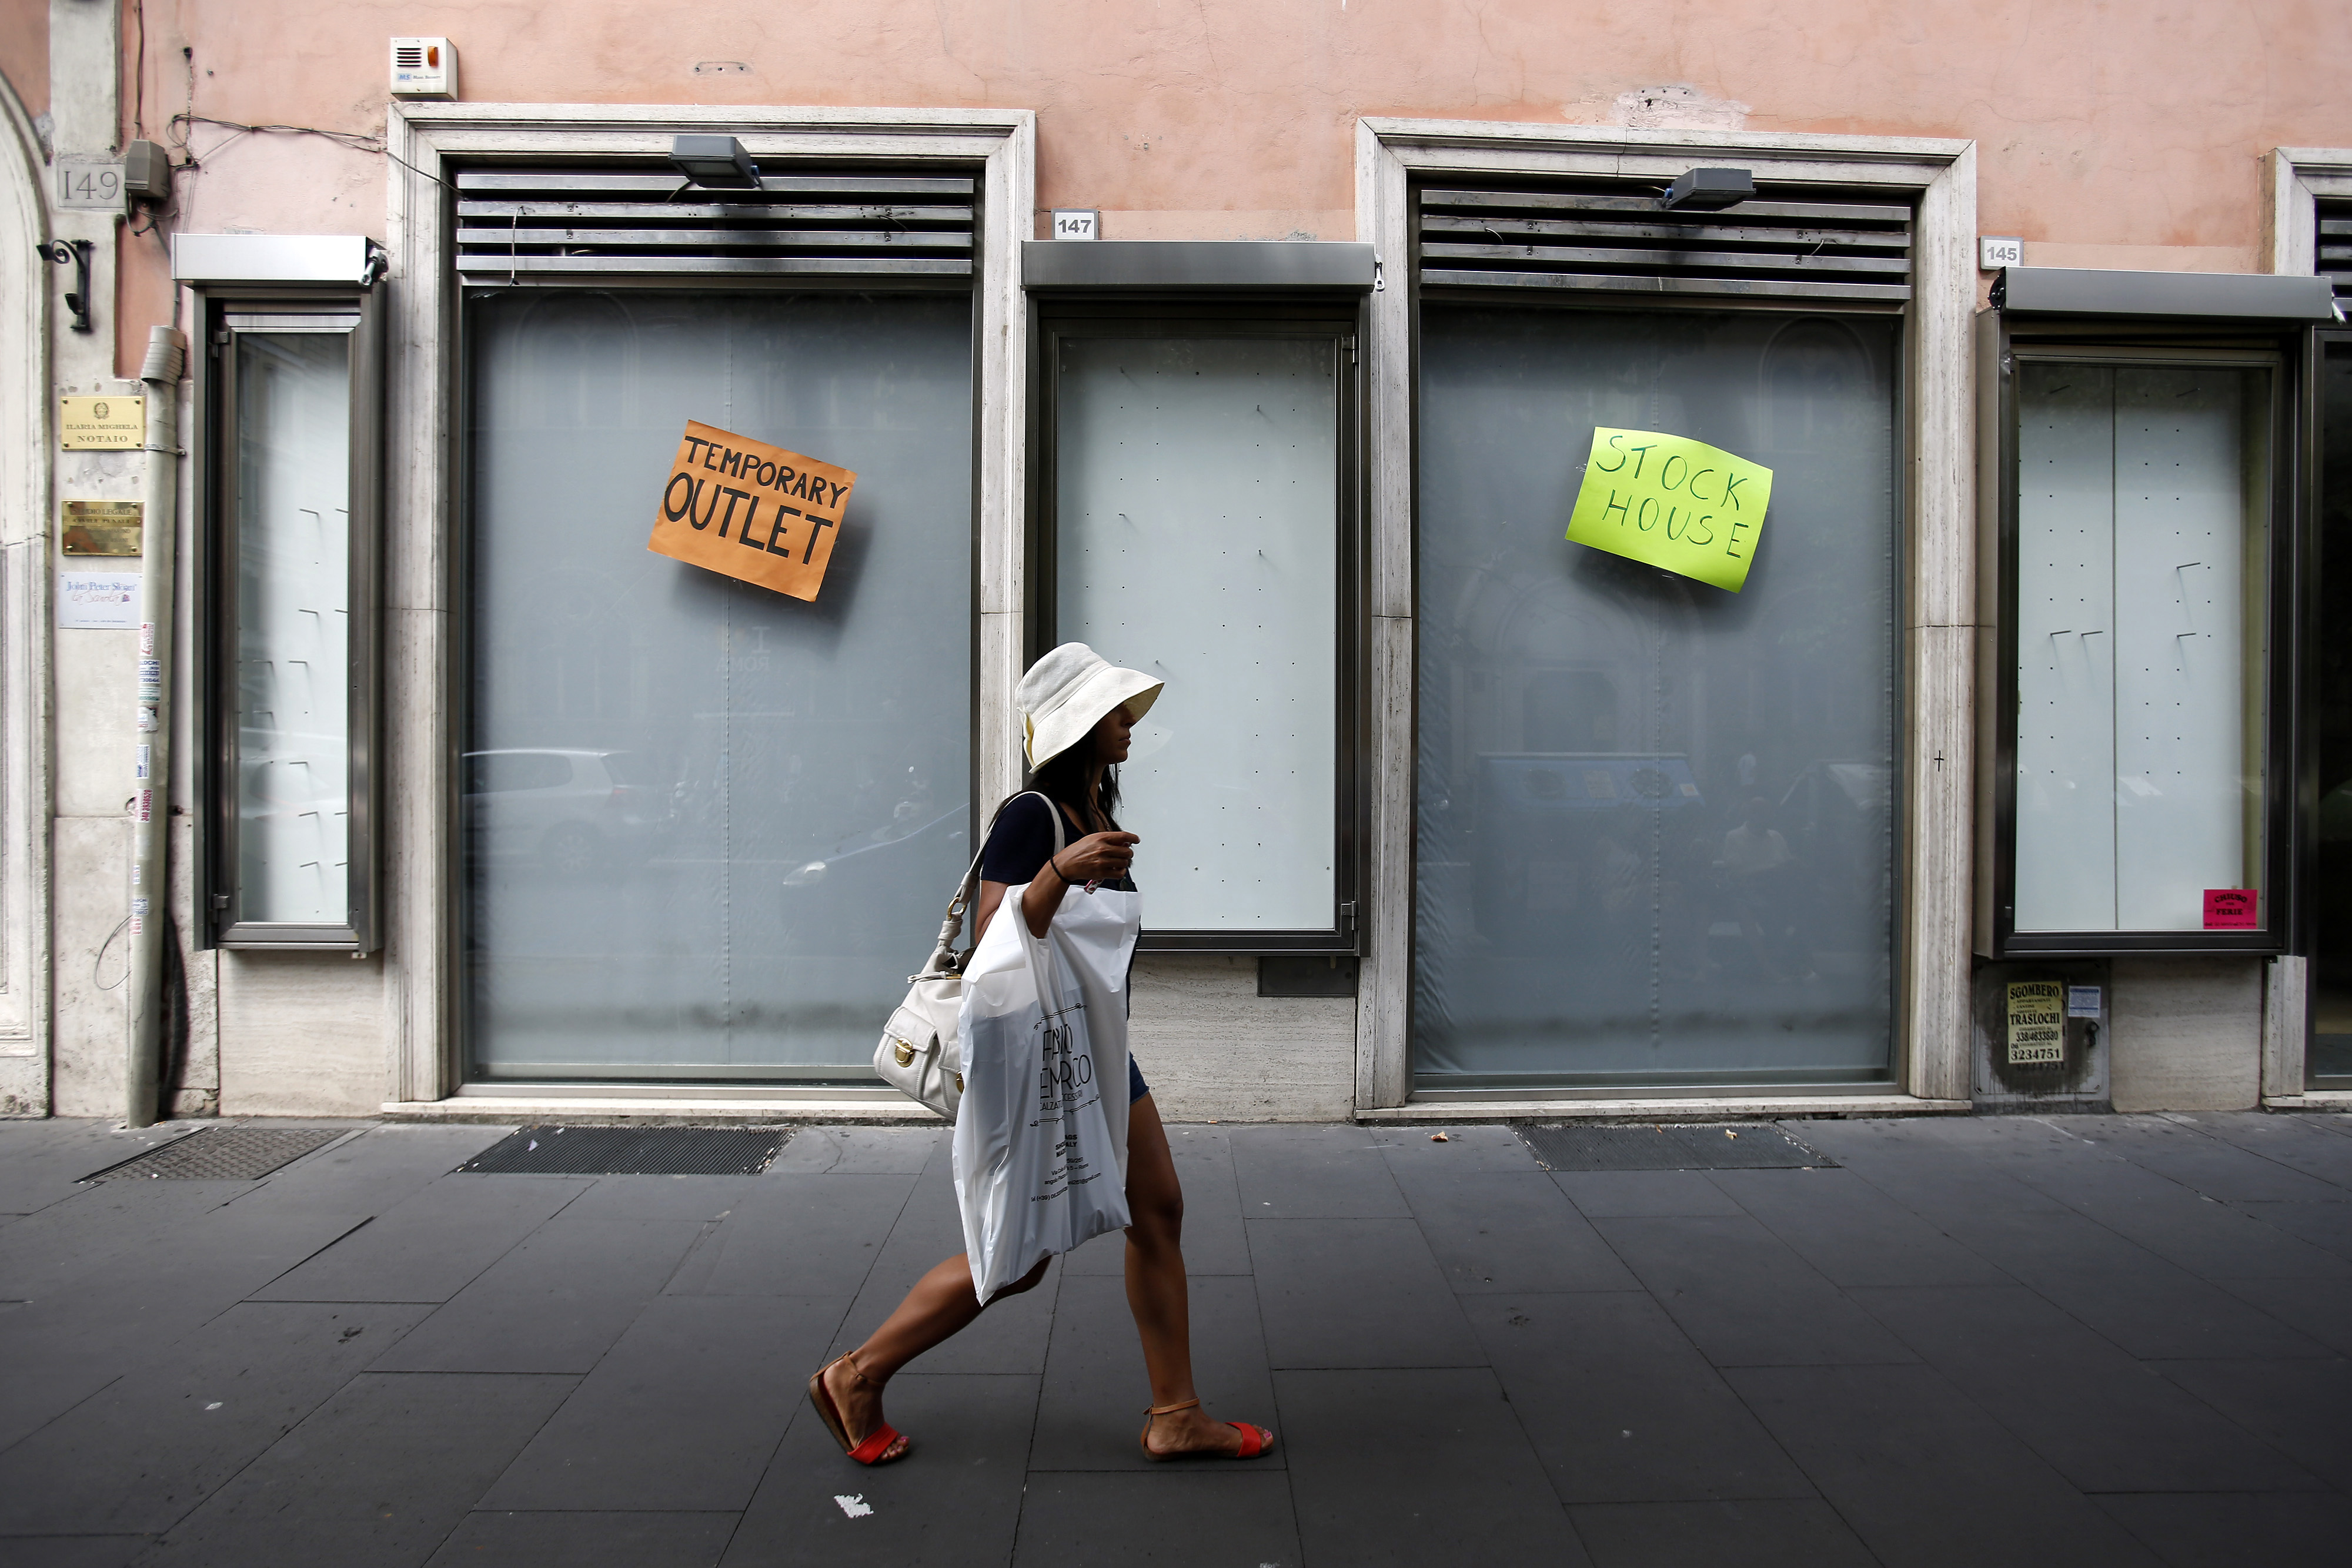 A pedestrian carries a plastic shopping bag as she passes a closed-down temporary outlet store in Rome, Italy, on Tuesday, Aug. 12, 2014. Italy's economy shrank 0.2 percent in the second quarter after contracting 0.1 percent in the previous three months. (Bloomberg—Bloomberg via Getty Images)